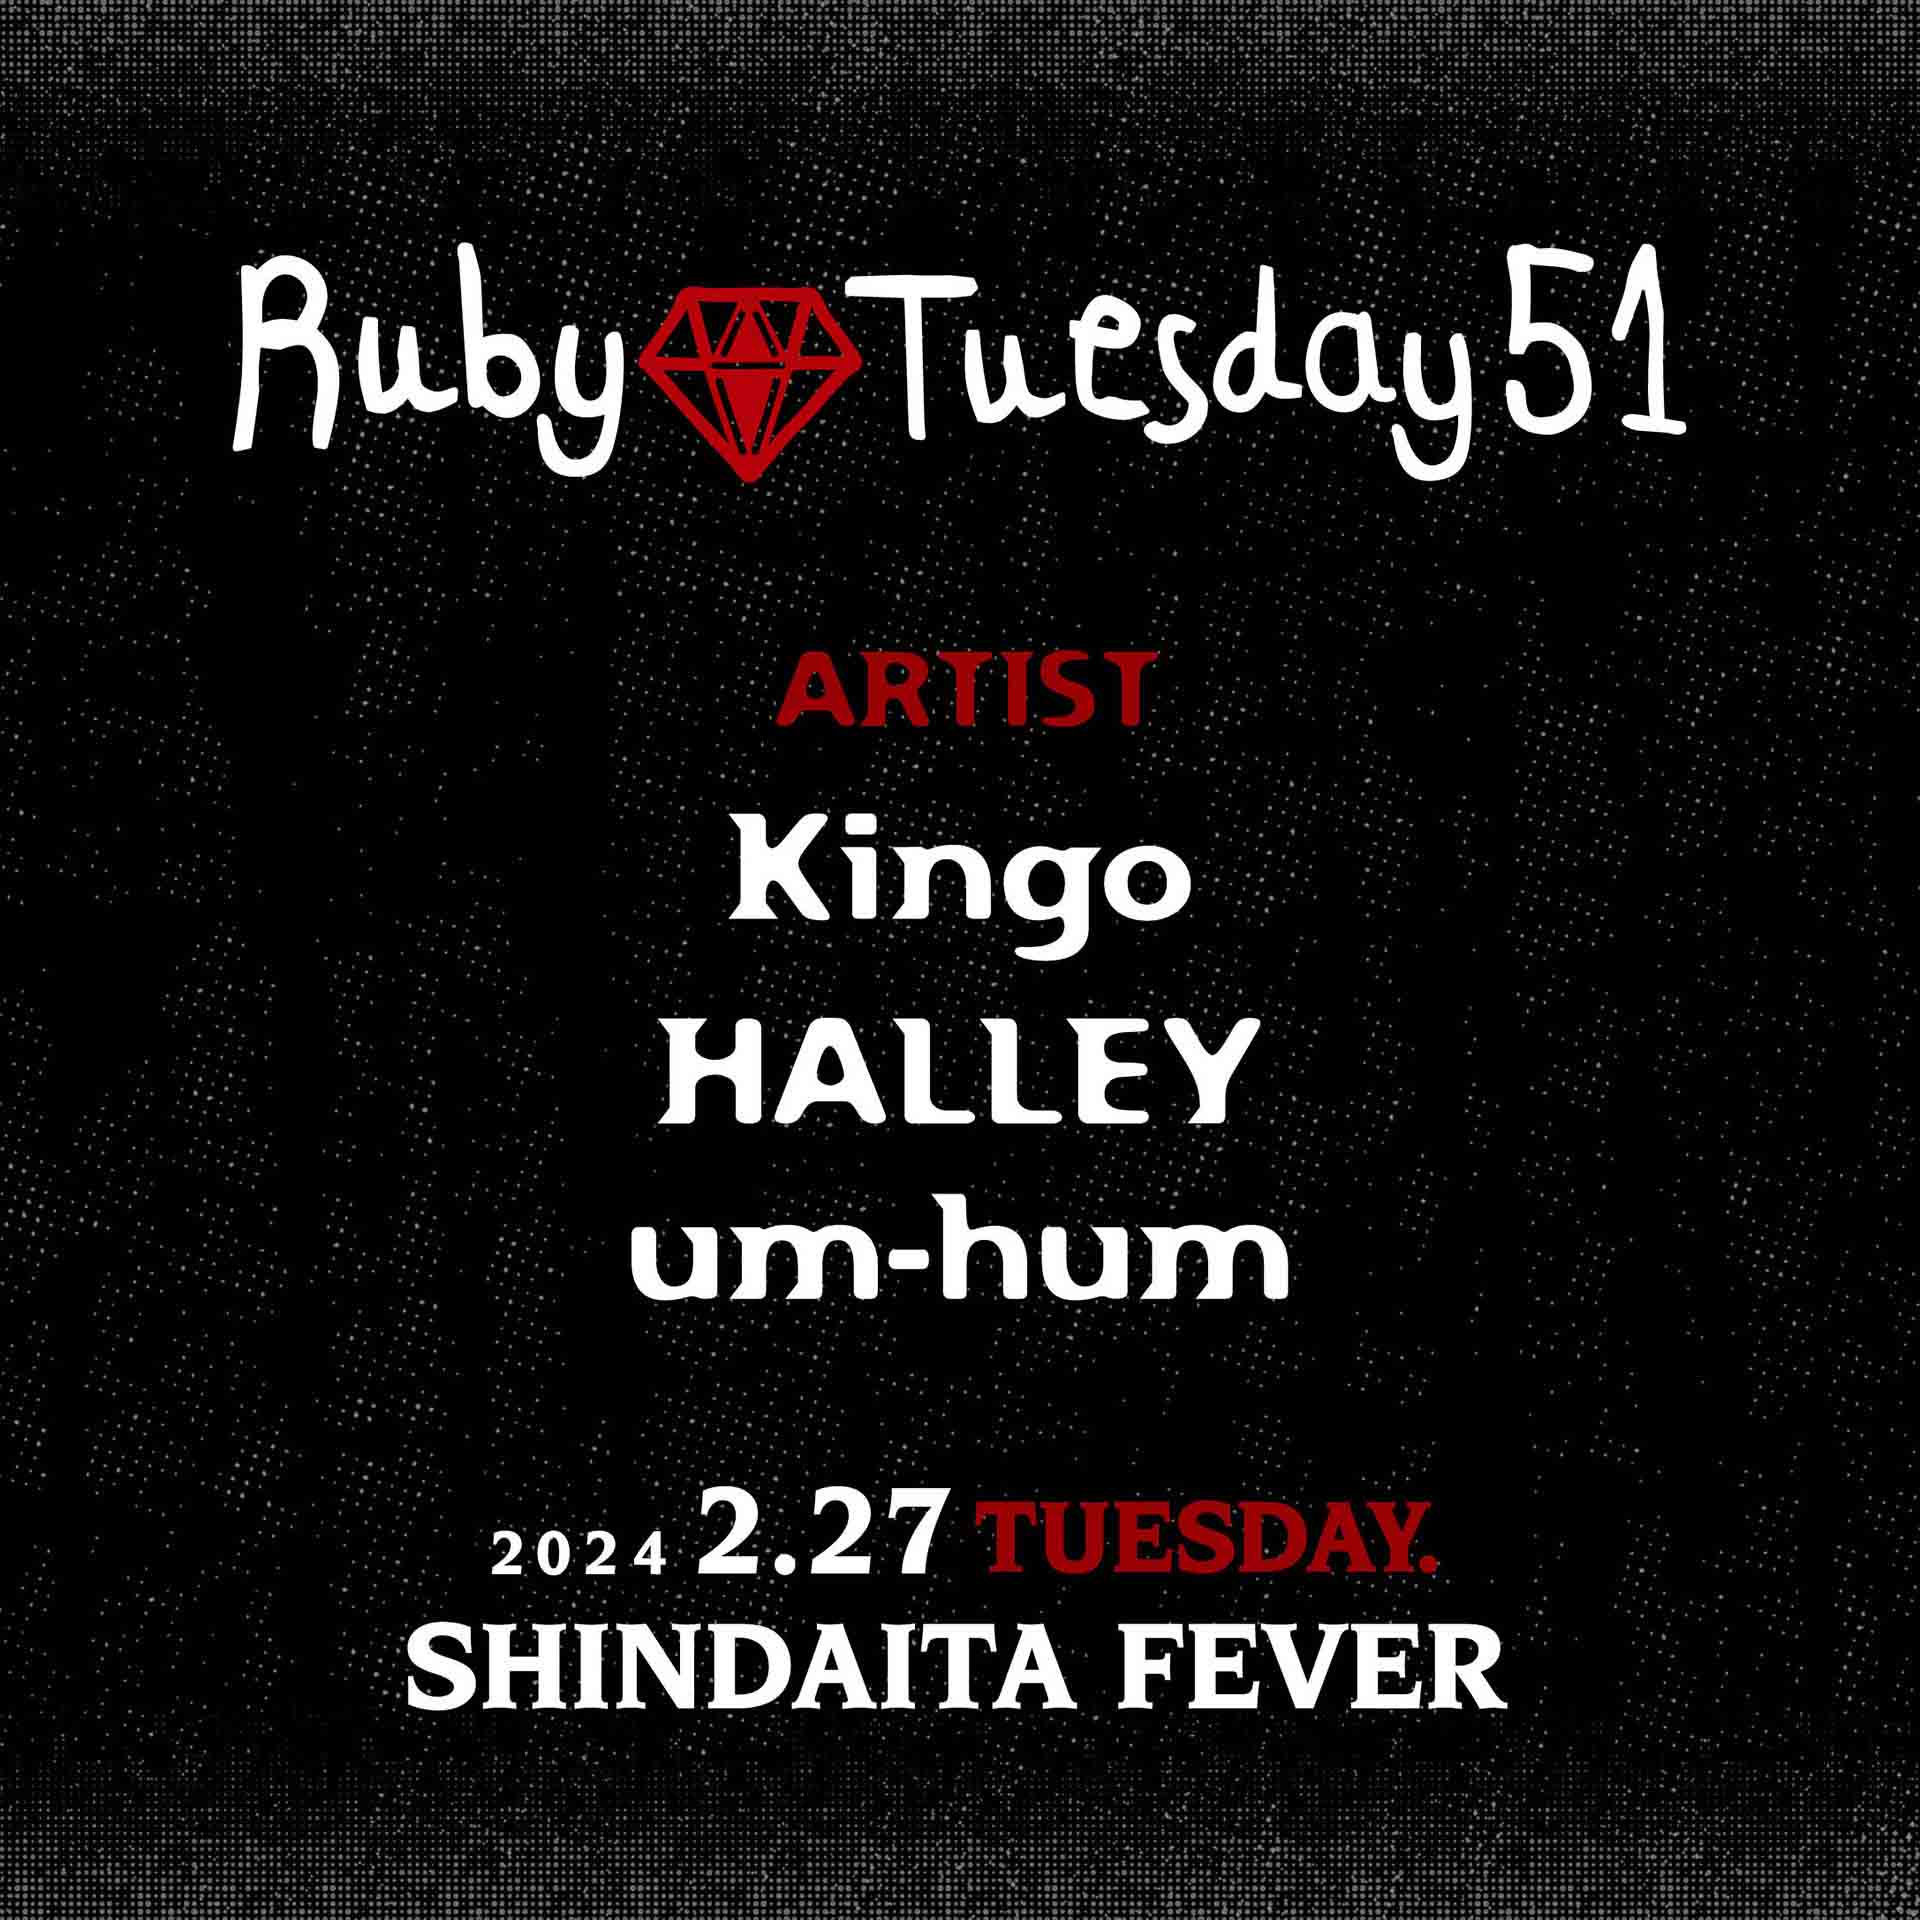 Ruby Tuesday 51